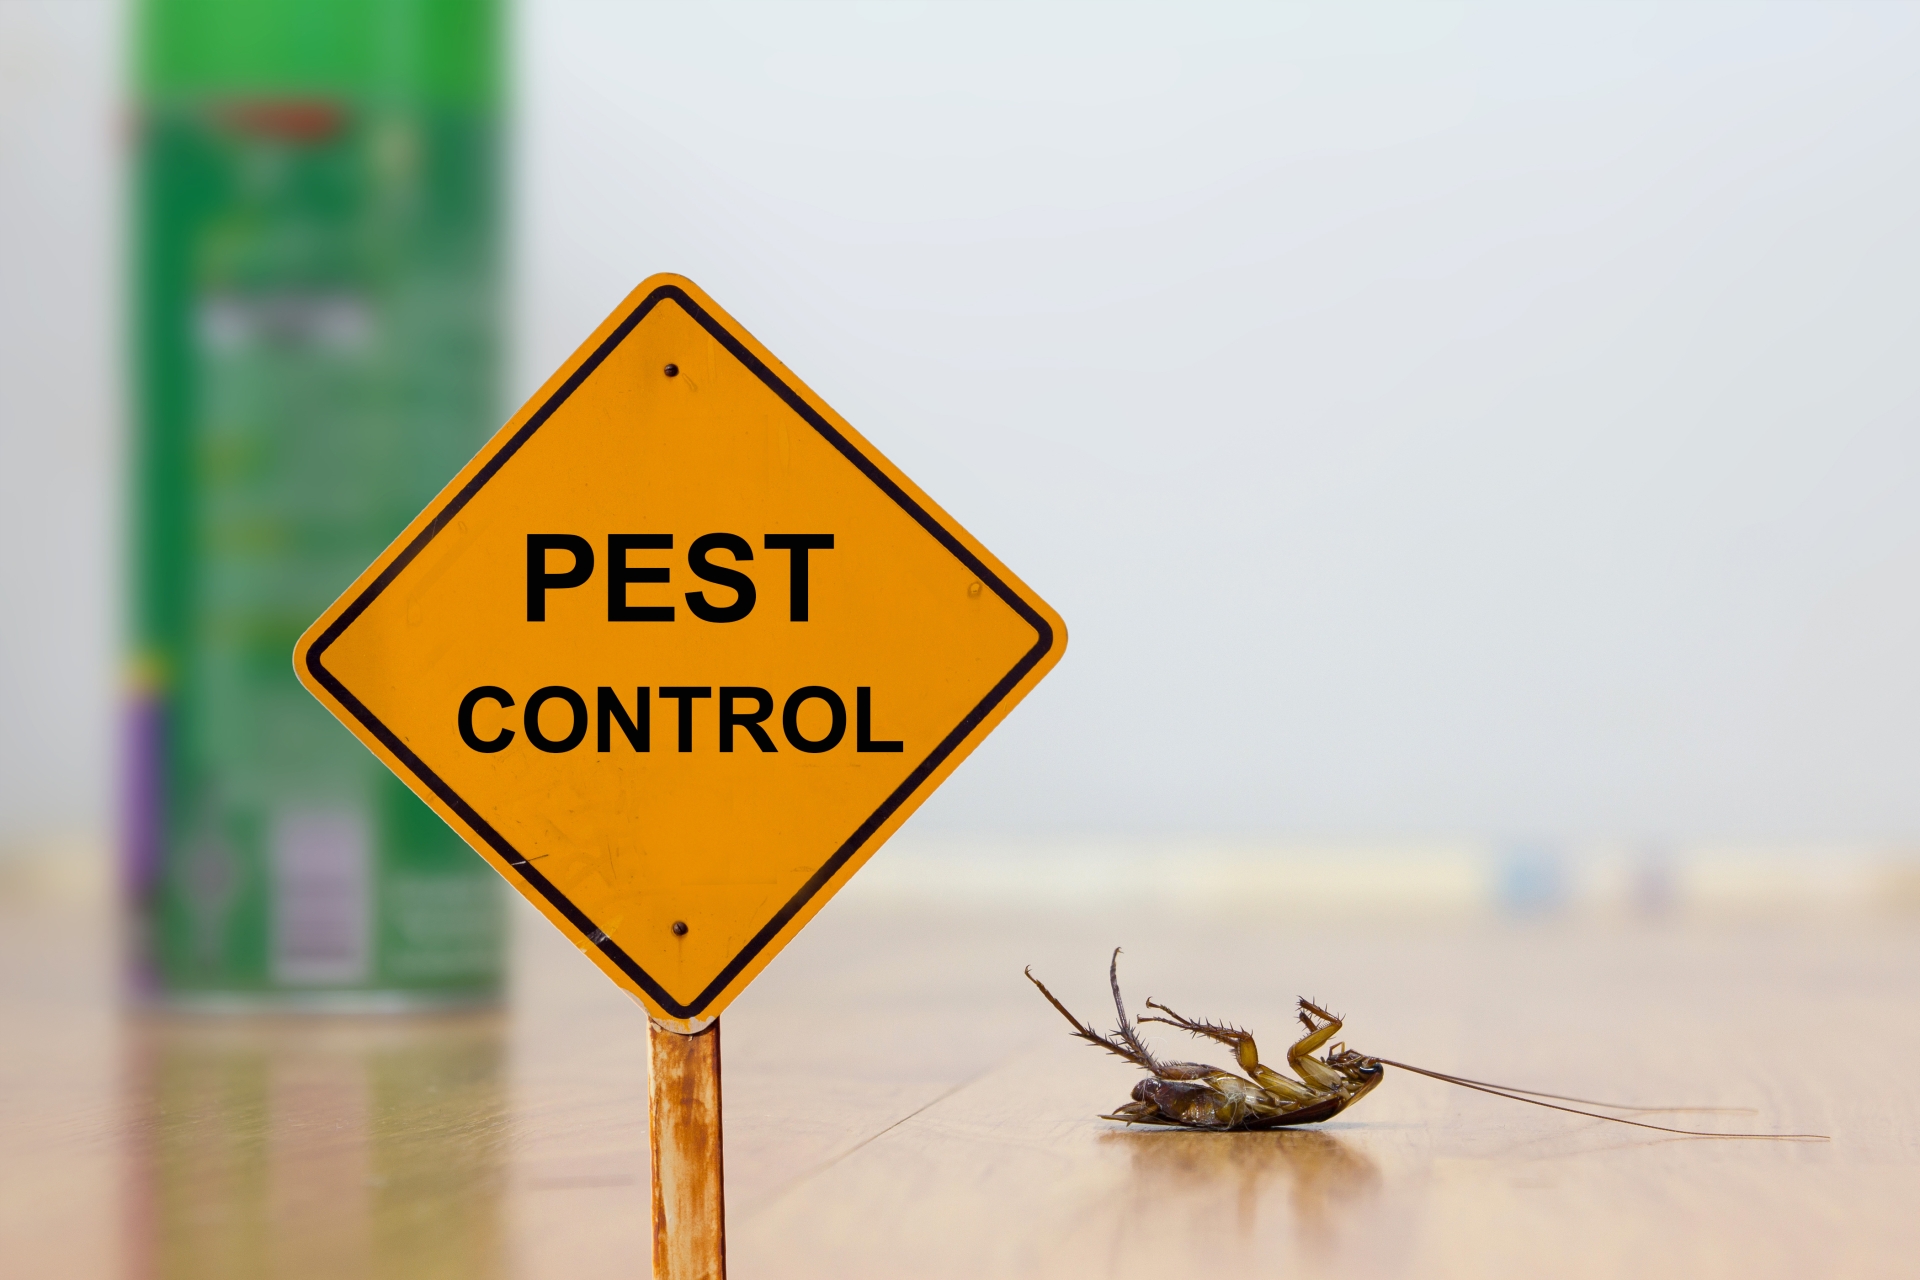 24 Hour Pest Control, Pest Control in Camden Town, NW1. Call Now 020 8166 9746